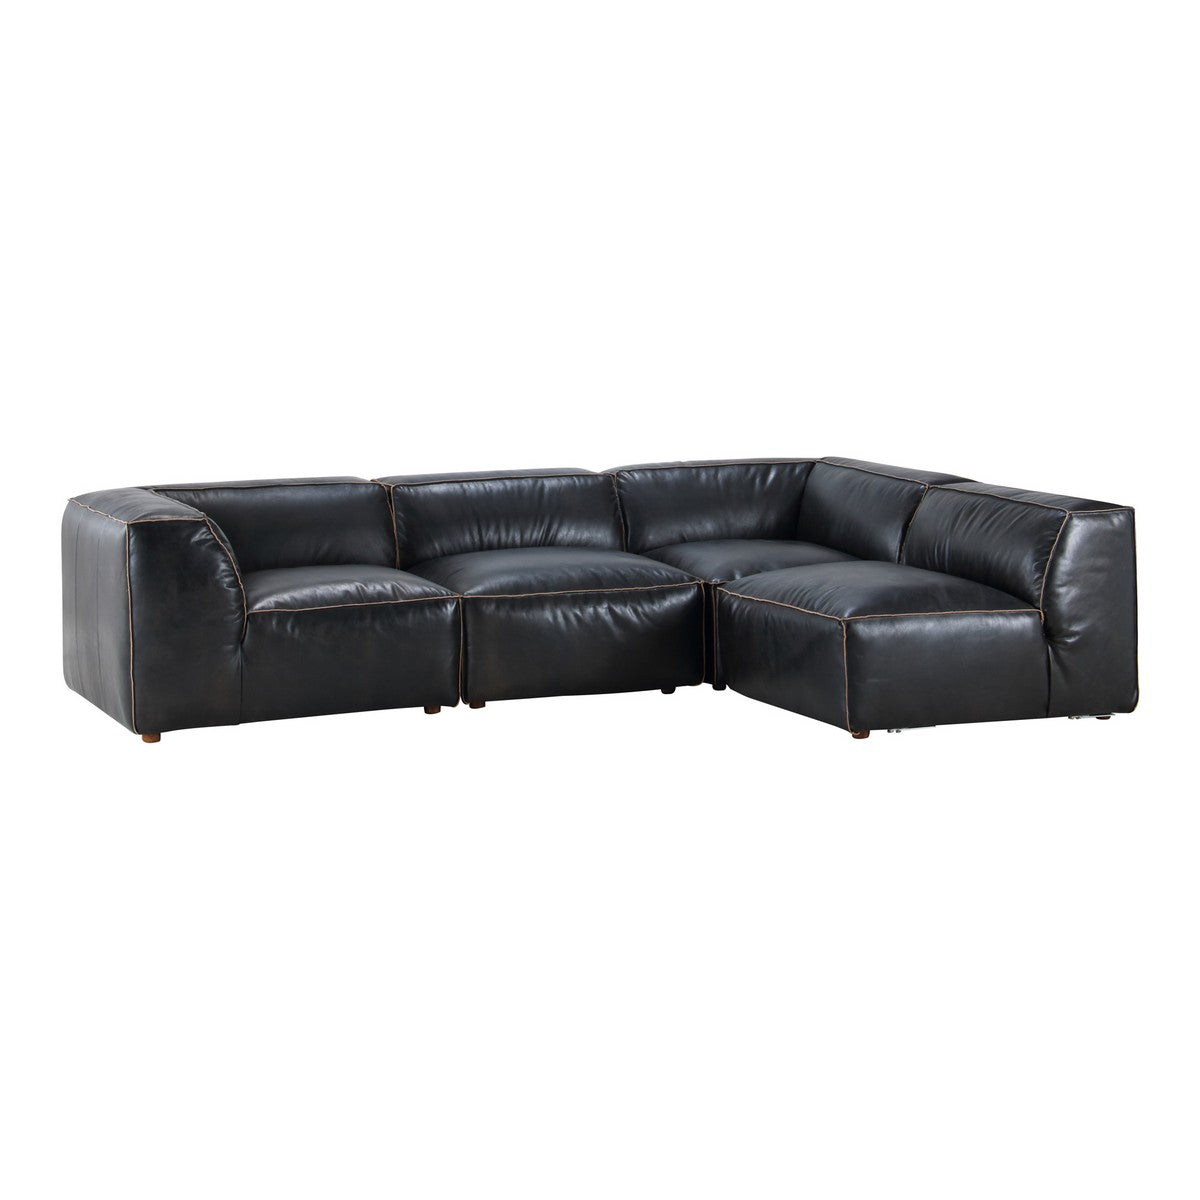 Moe's Home Collection Luxe Signature Modular Sectional Antique Black - QN-1022-01